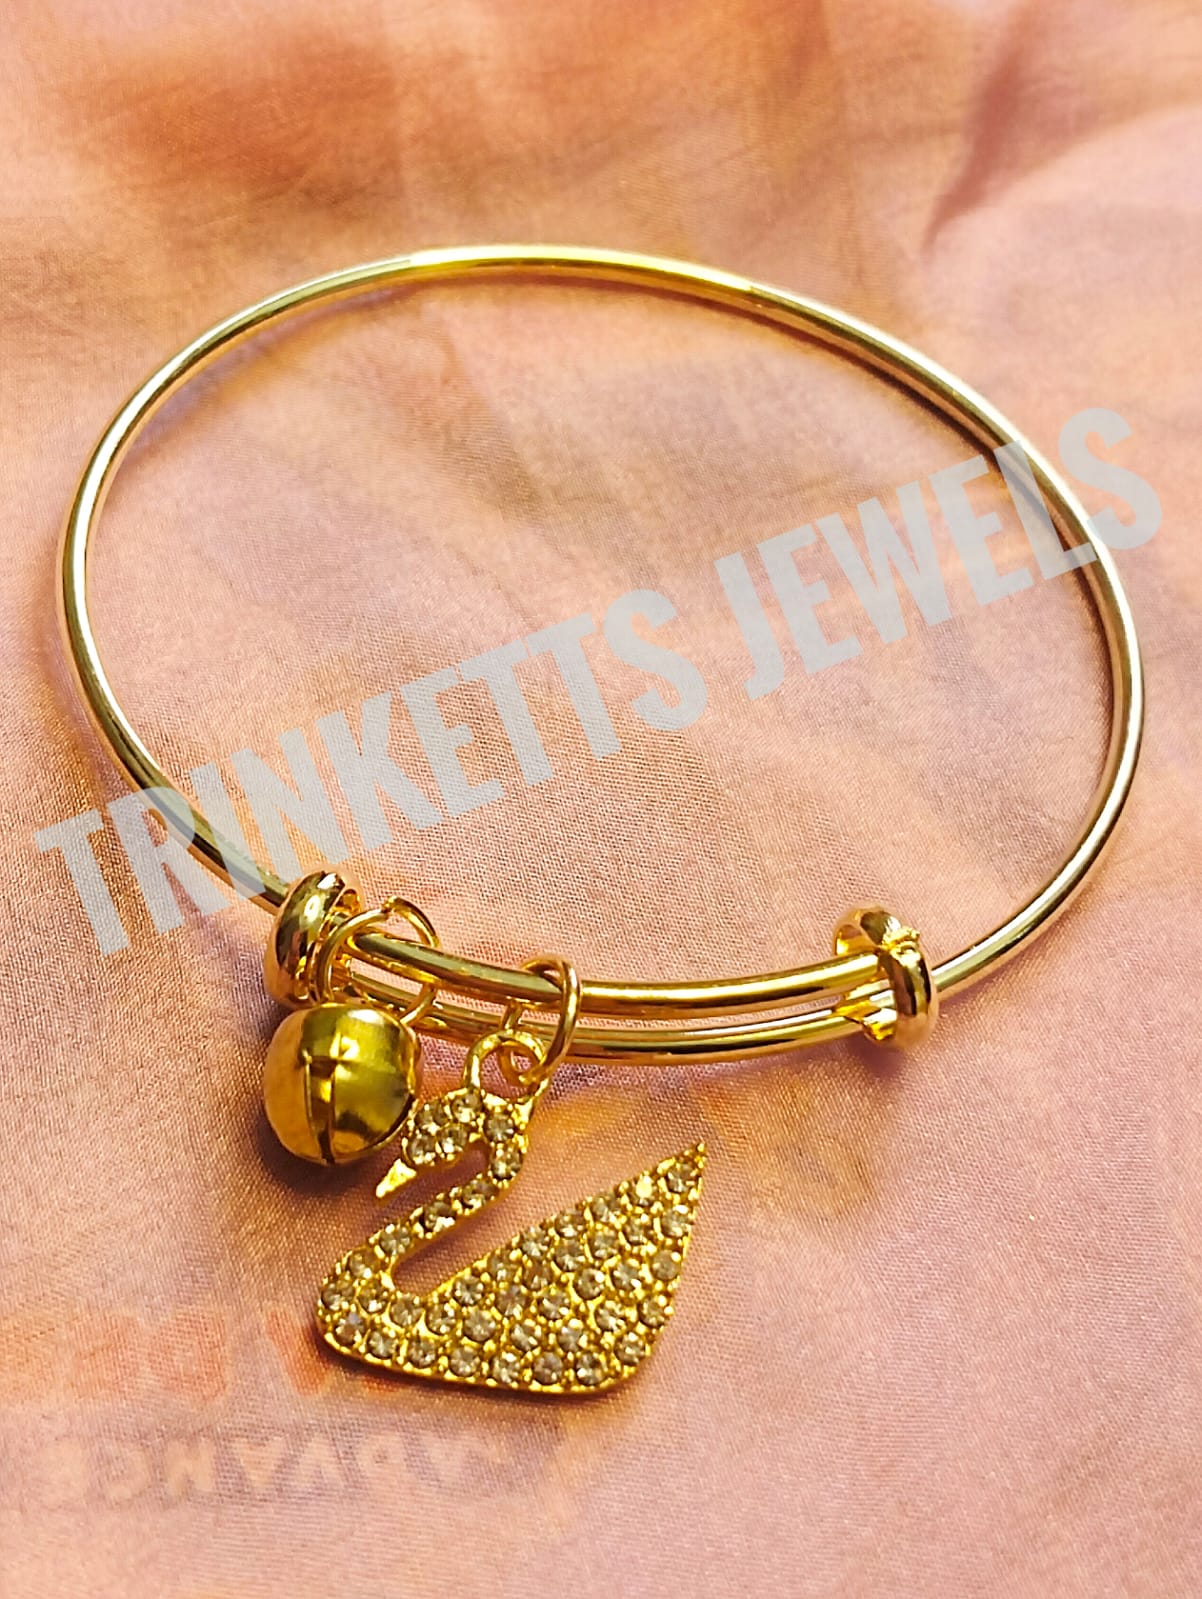 Delicate Golden Bangle Bracelet with Swan Charm and Ghungroo Accent